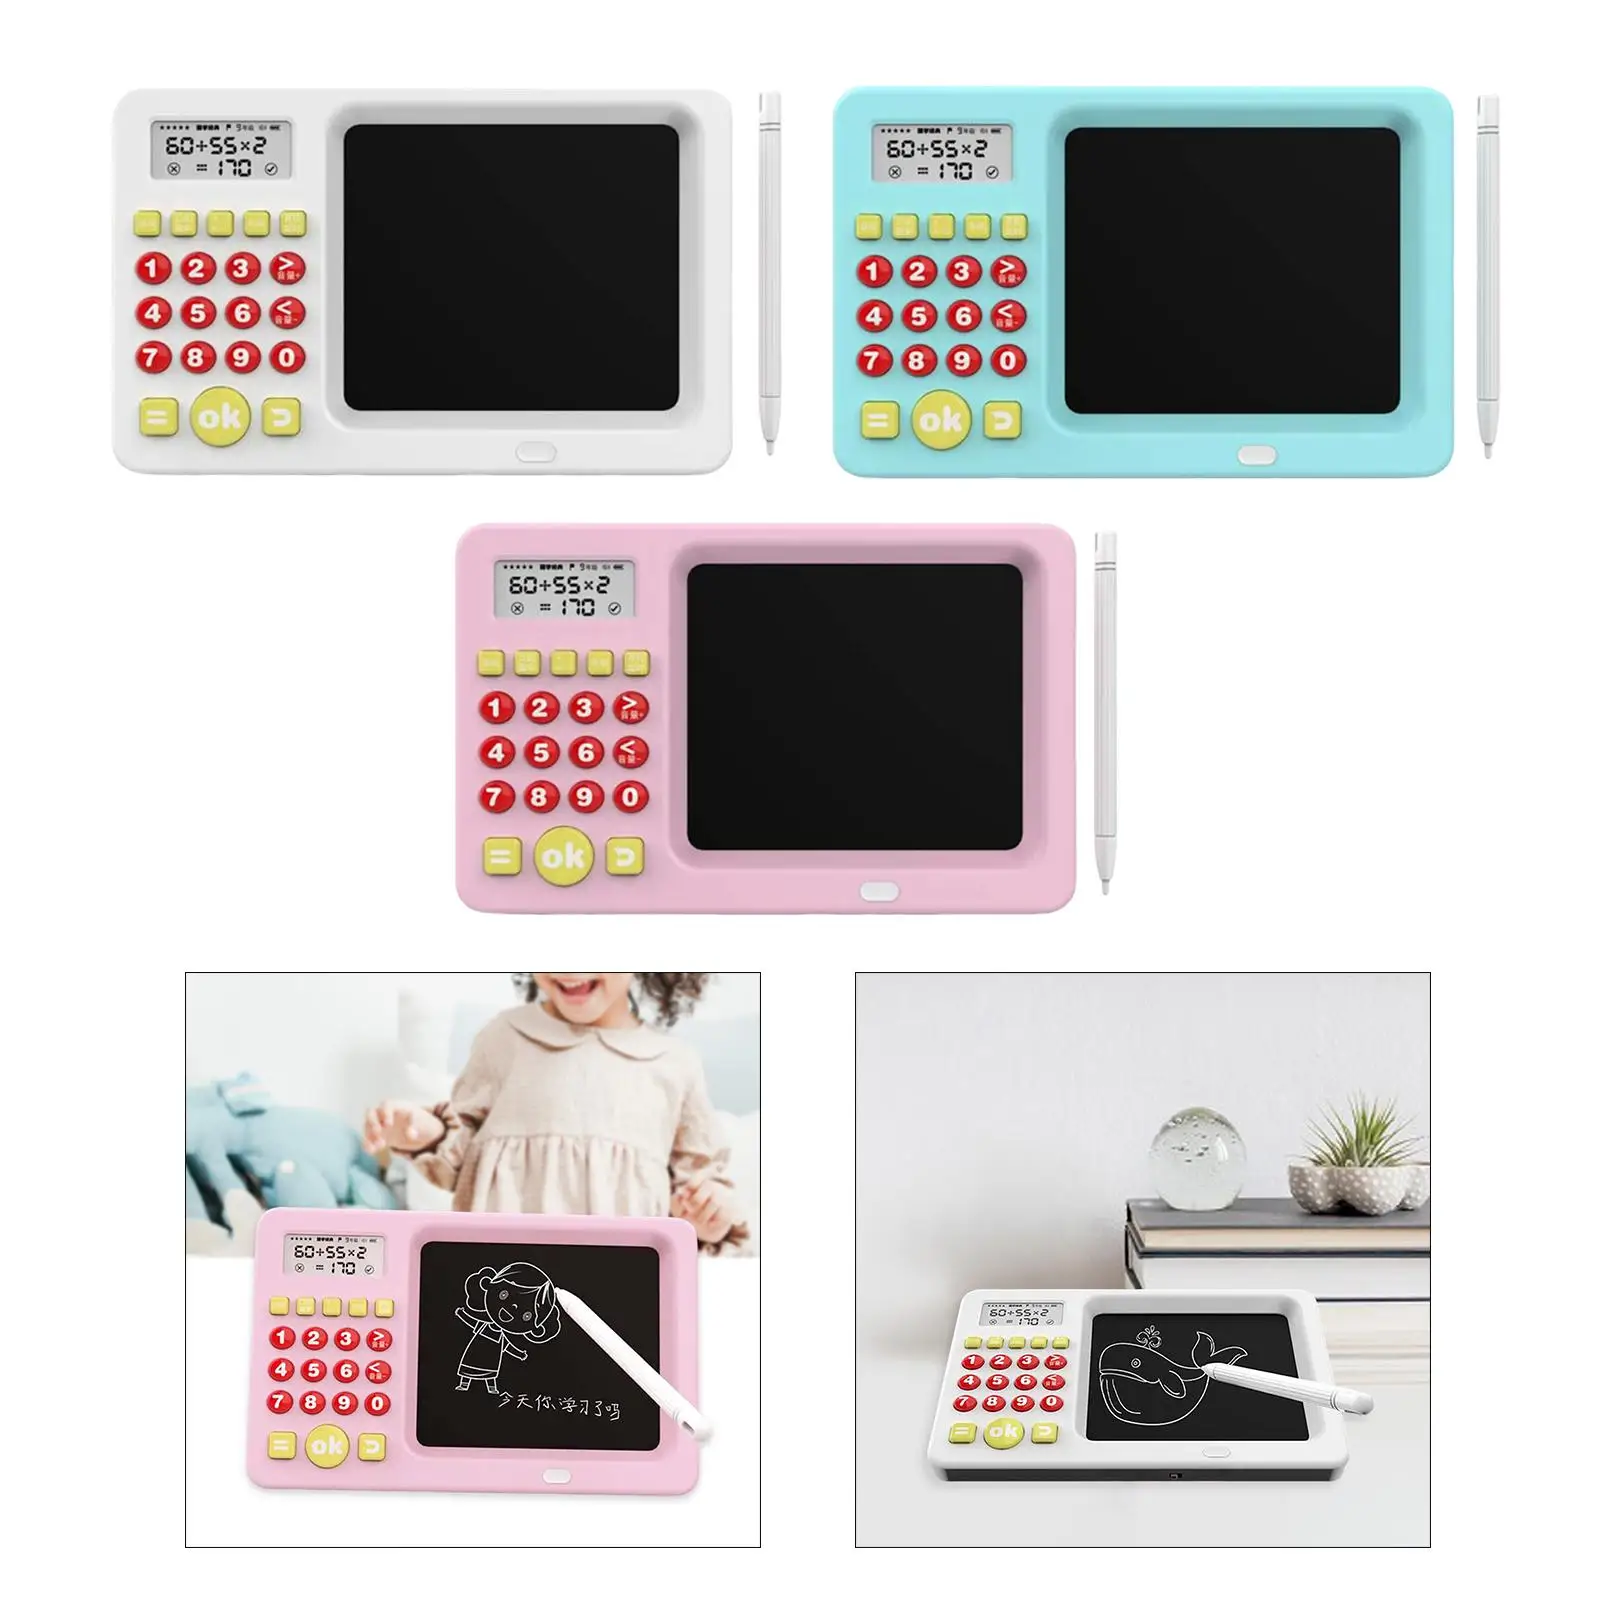 Writing Tablet Mouth Calculator Intelligent Learning Machine Math Game Oral Arithmetic Exercise Machine Boys Kids